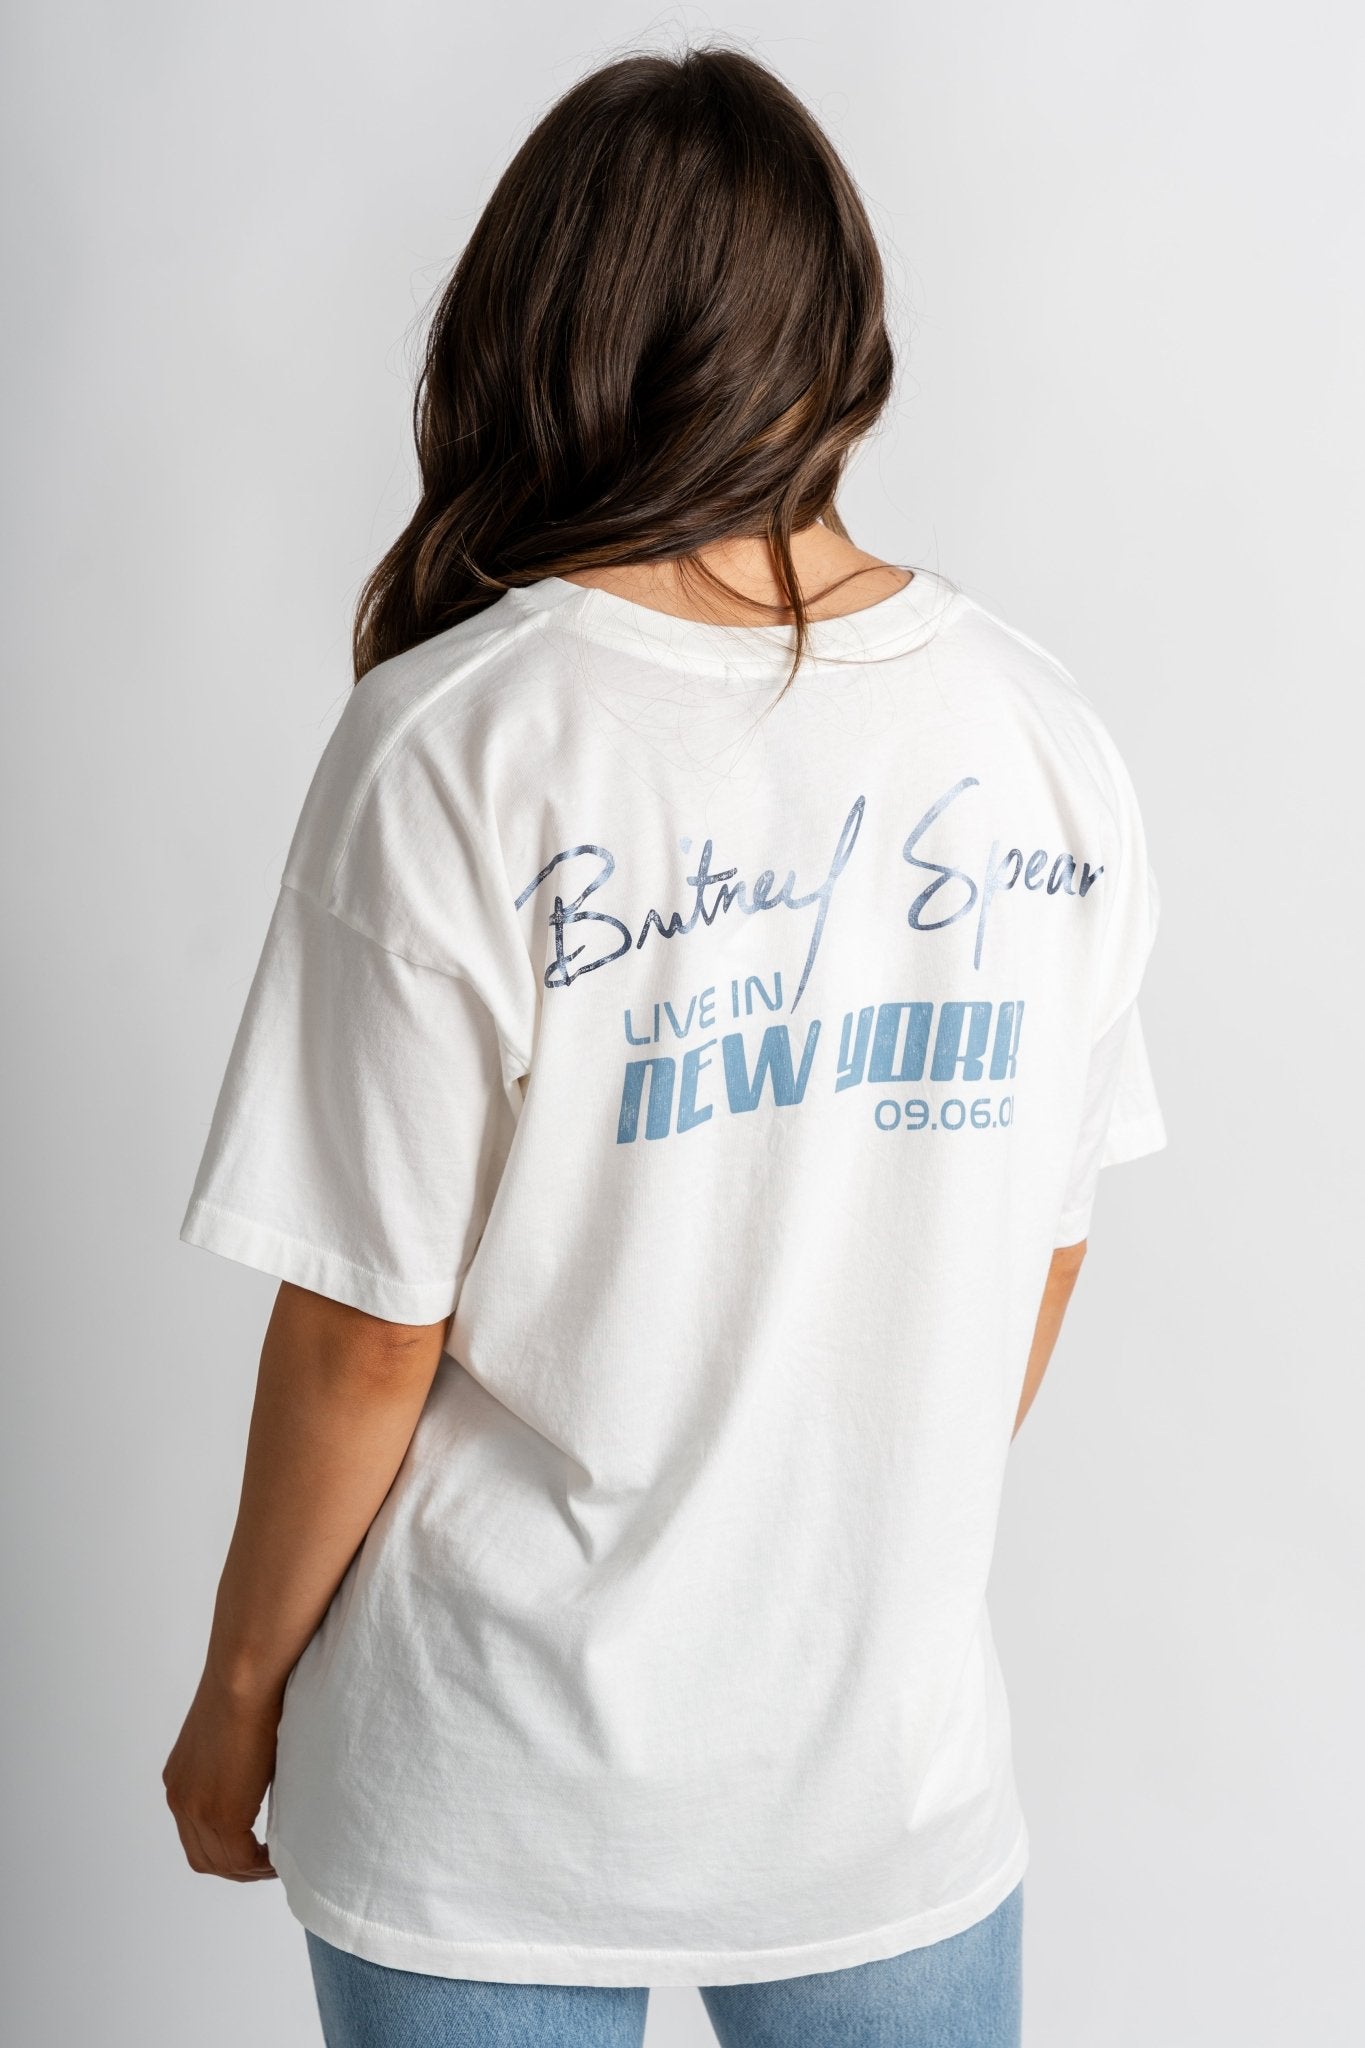 DayDreamer Britney Spears slave for you tee vintage white